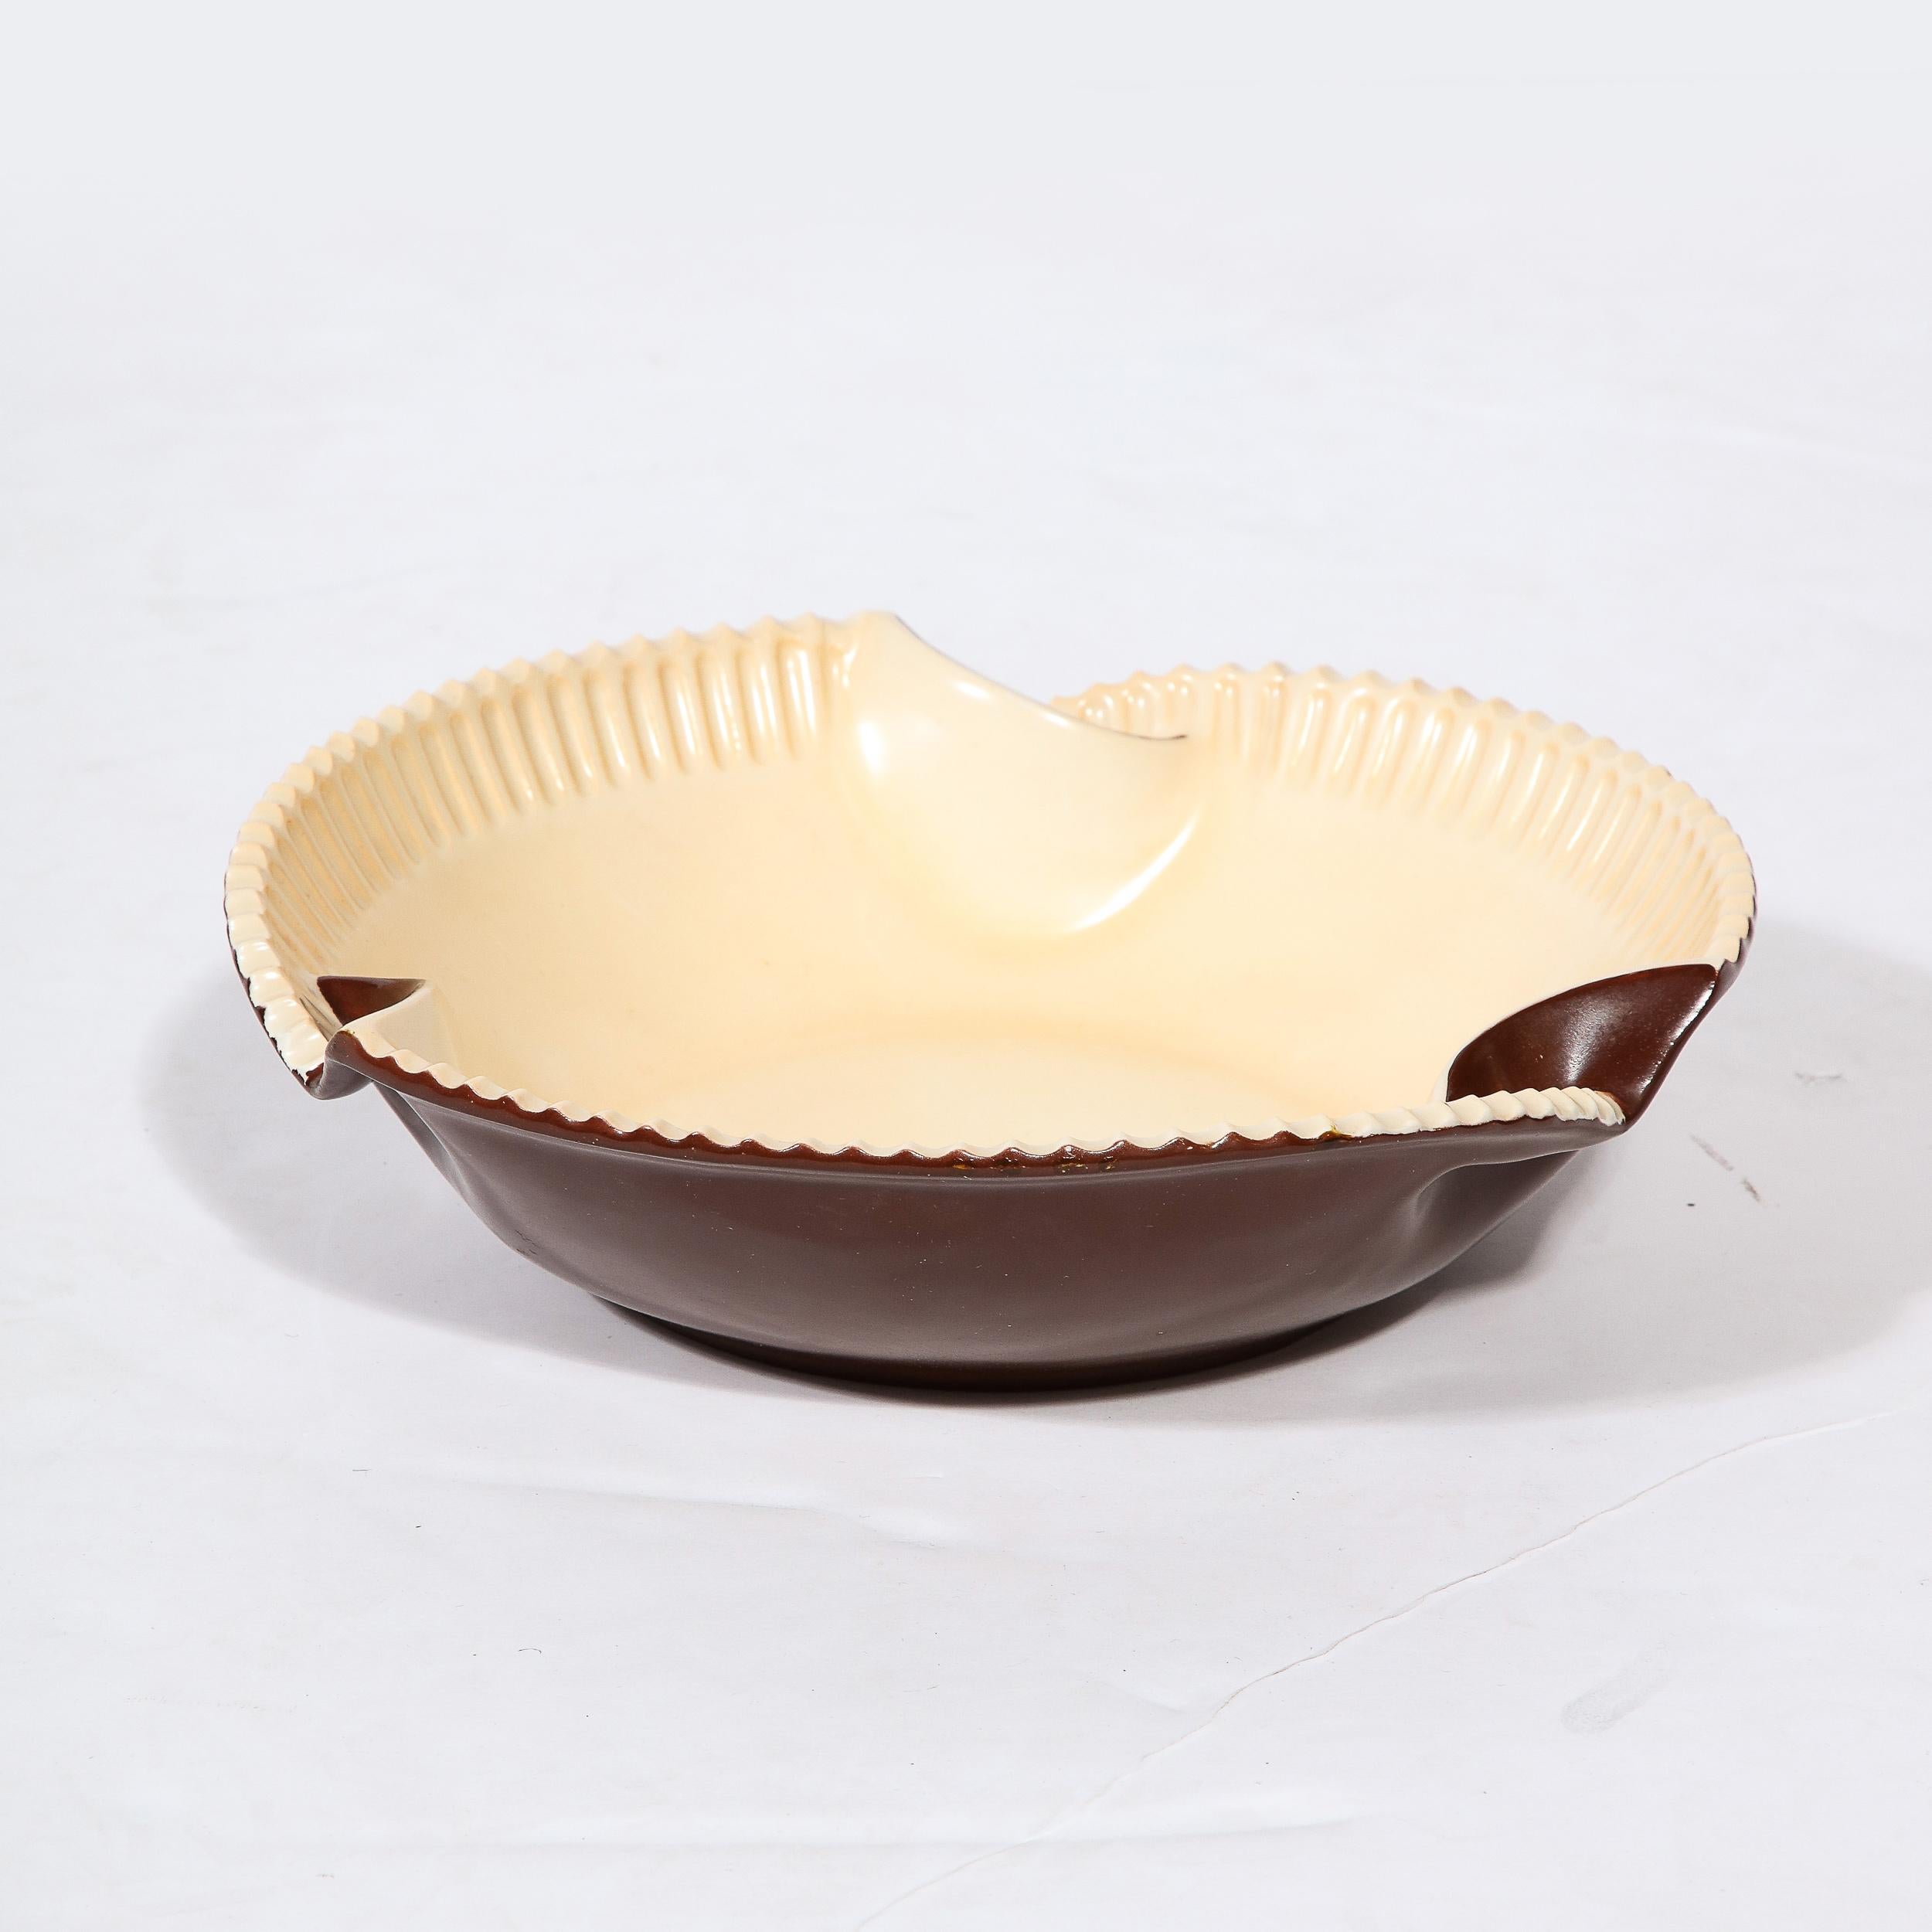 Czechoslovakian Art Deco Cream and Espresso Hued Ceramic Bowl by Royal Crown In Excellent Condition For Sale In New York, NY